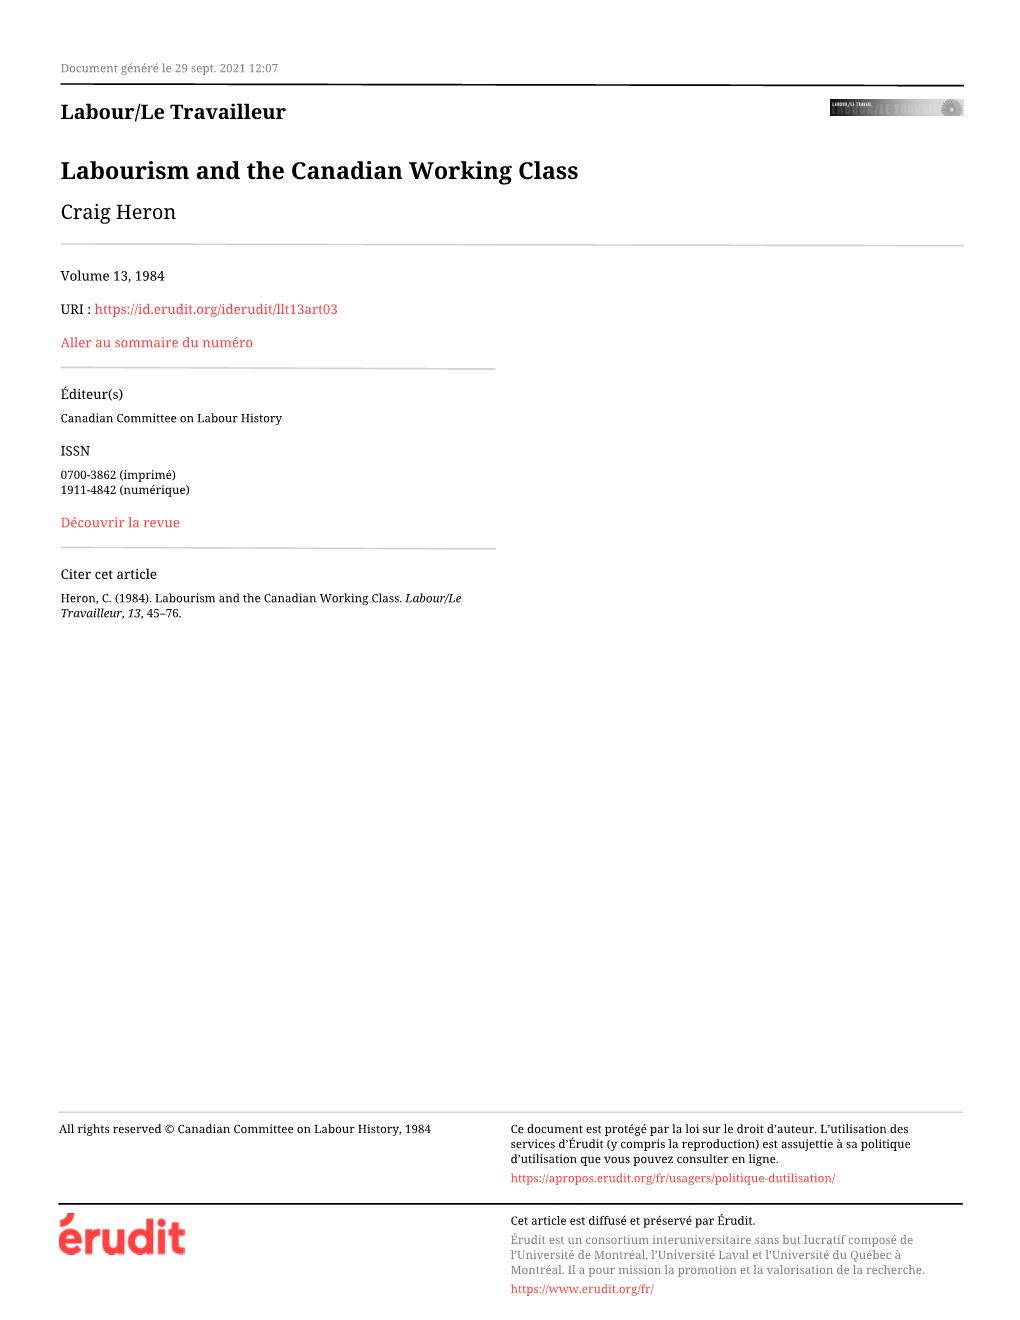 Labourism and the Canadian Working Class Craig Heron